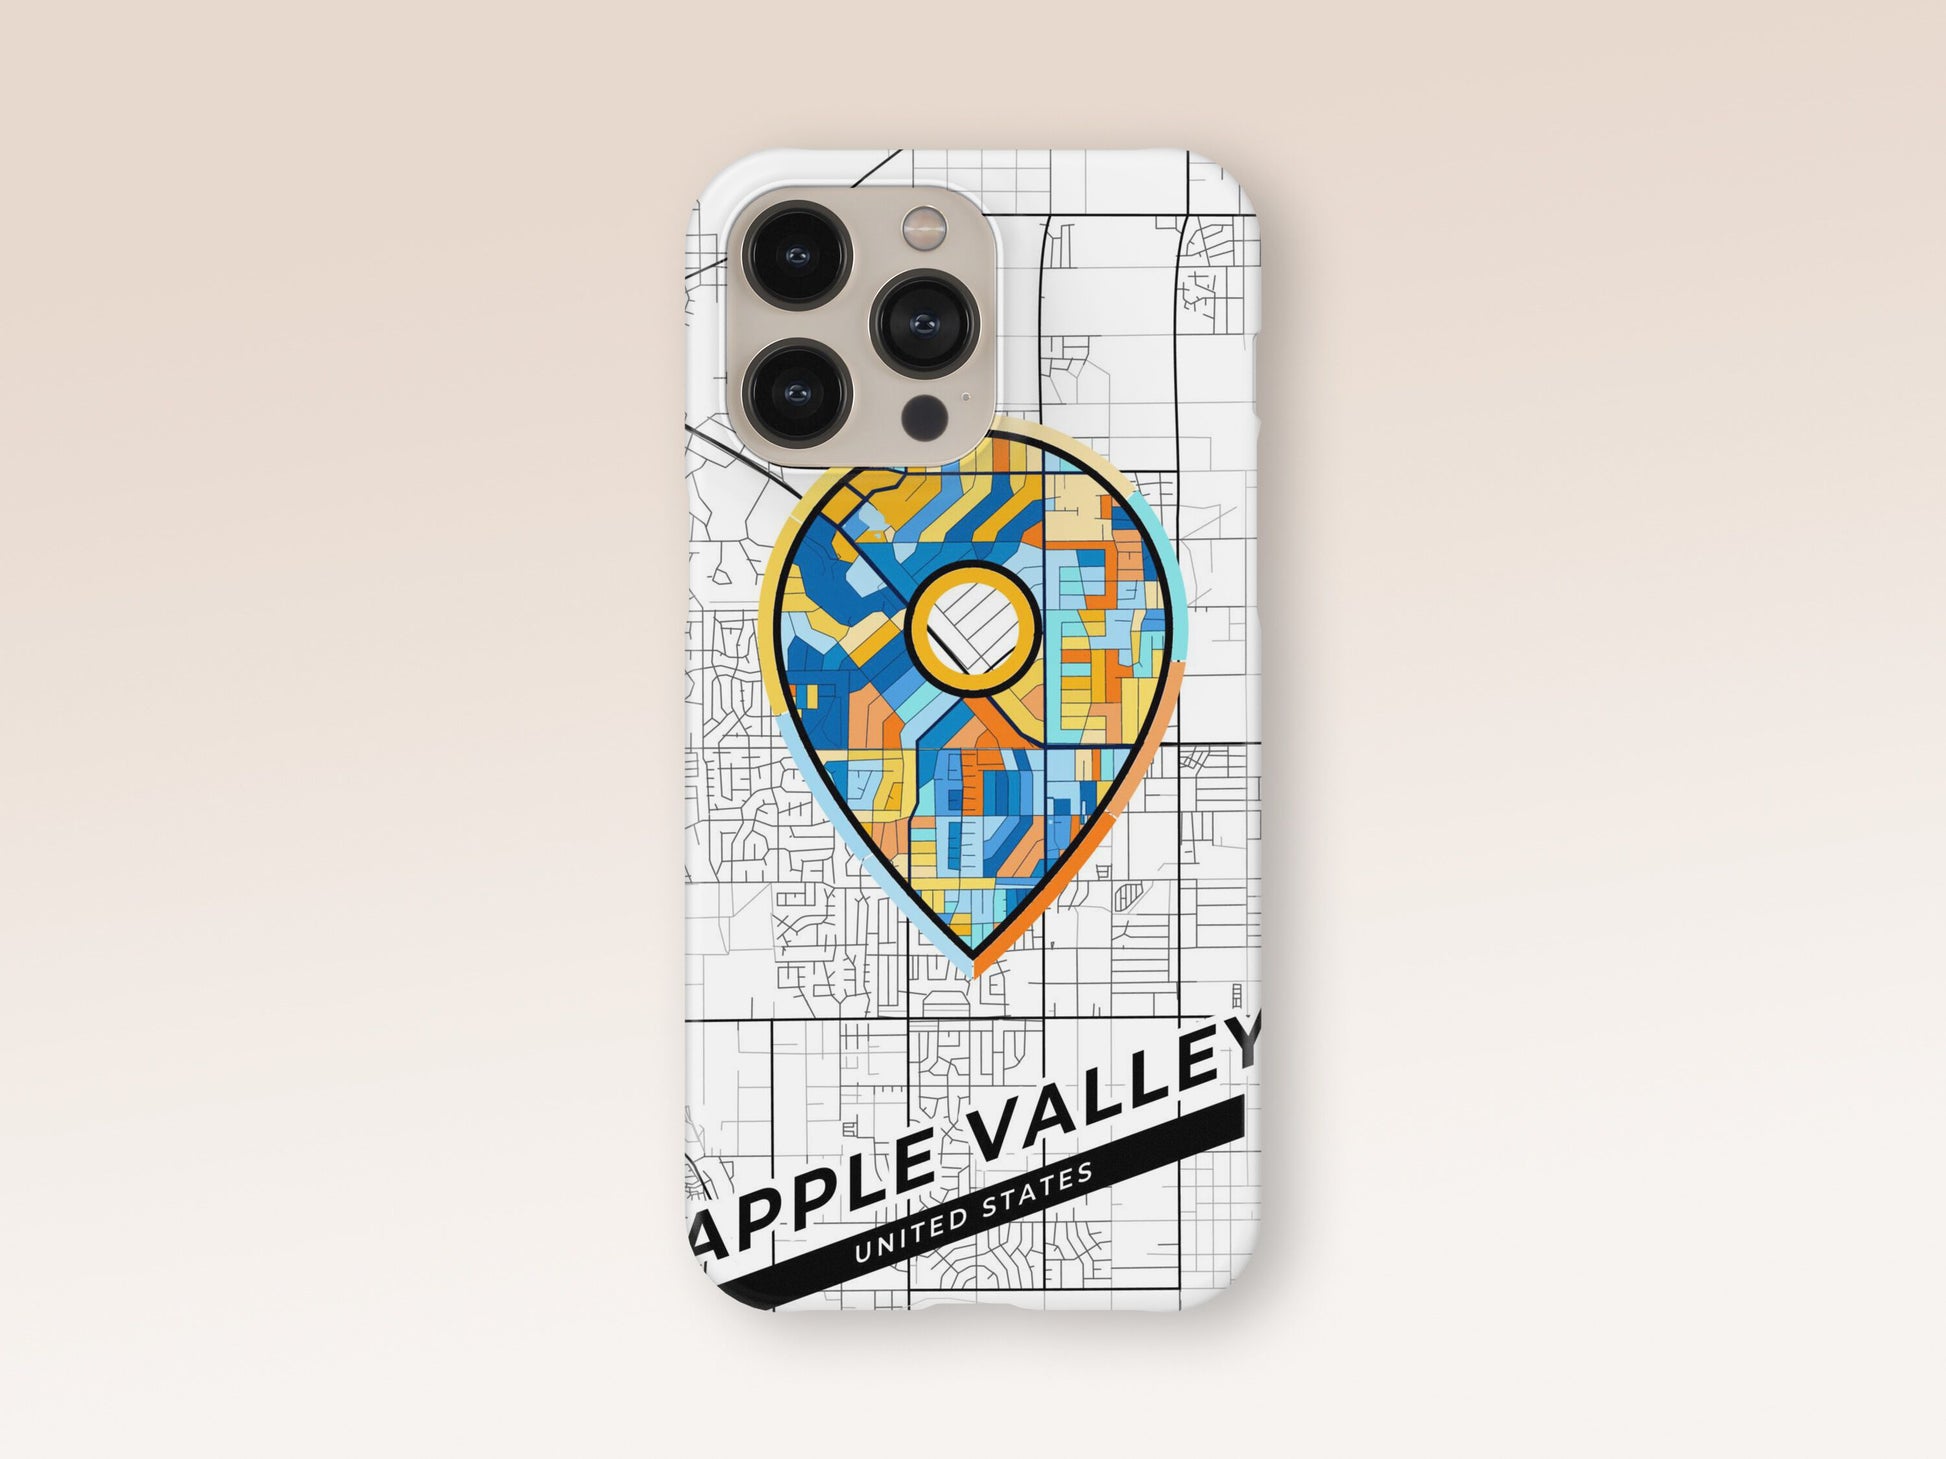 Apple Valley California slim phone case with colorful icon. Birthday, wedding or housewarming gift. Couple match cases. 1